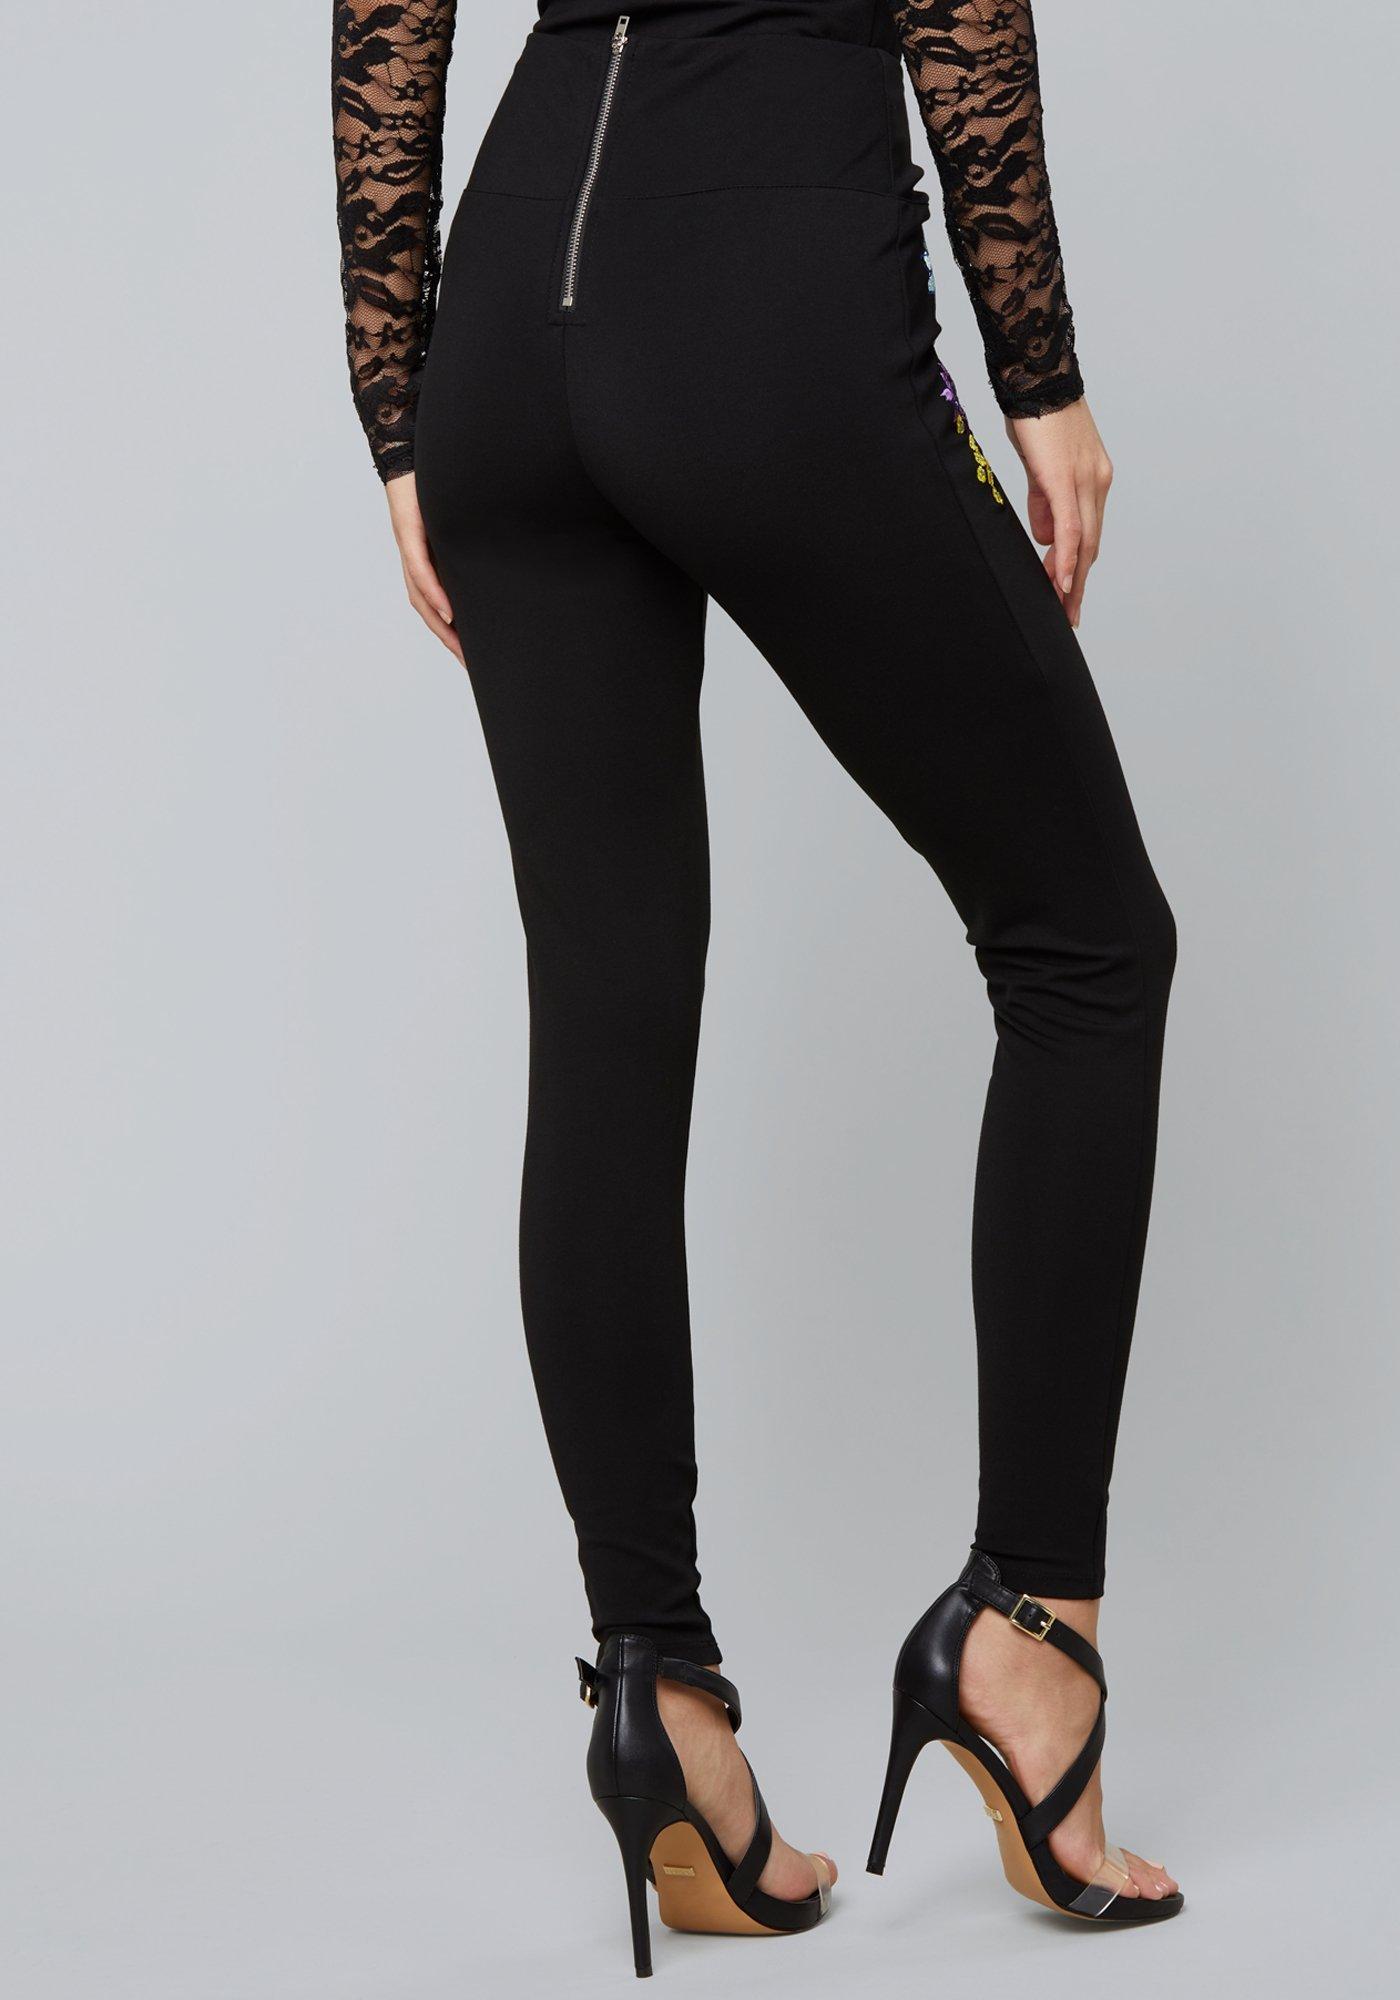 Bebe Synthetic Adley Embroidered Leggings in Black - Lyst